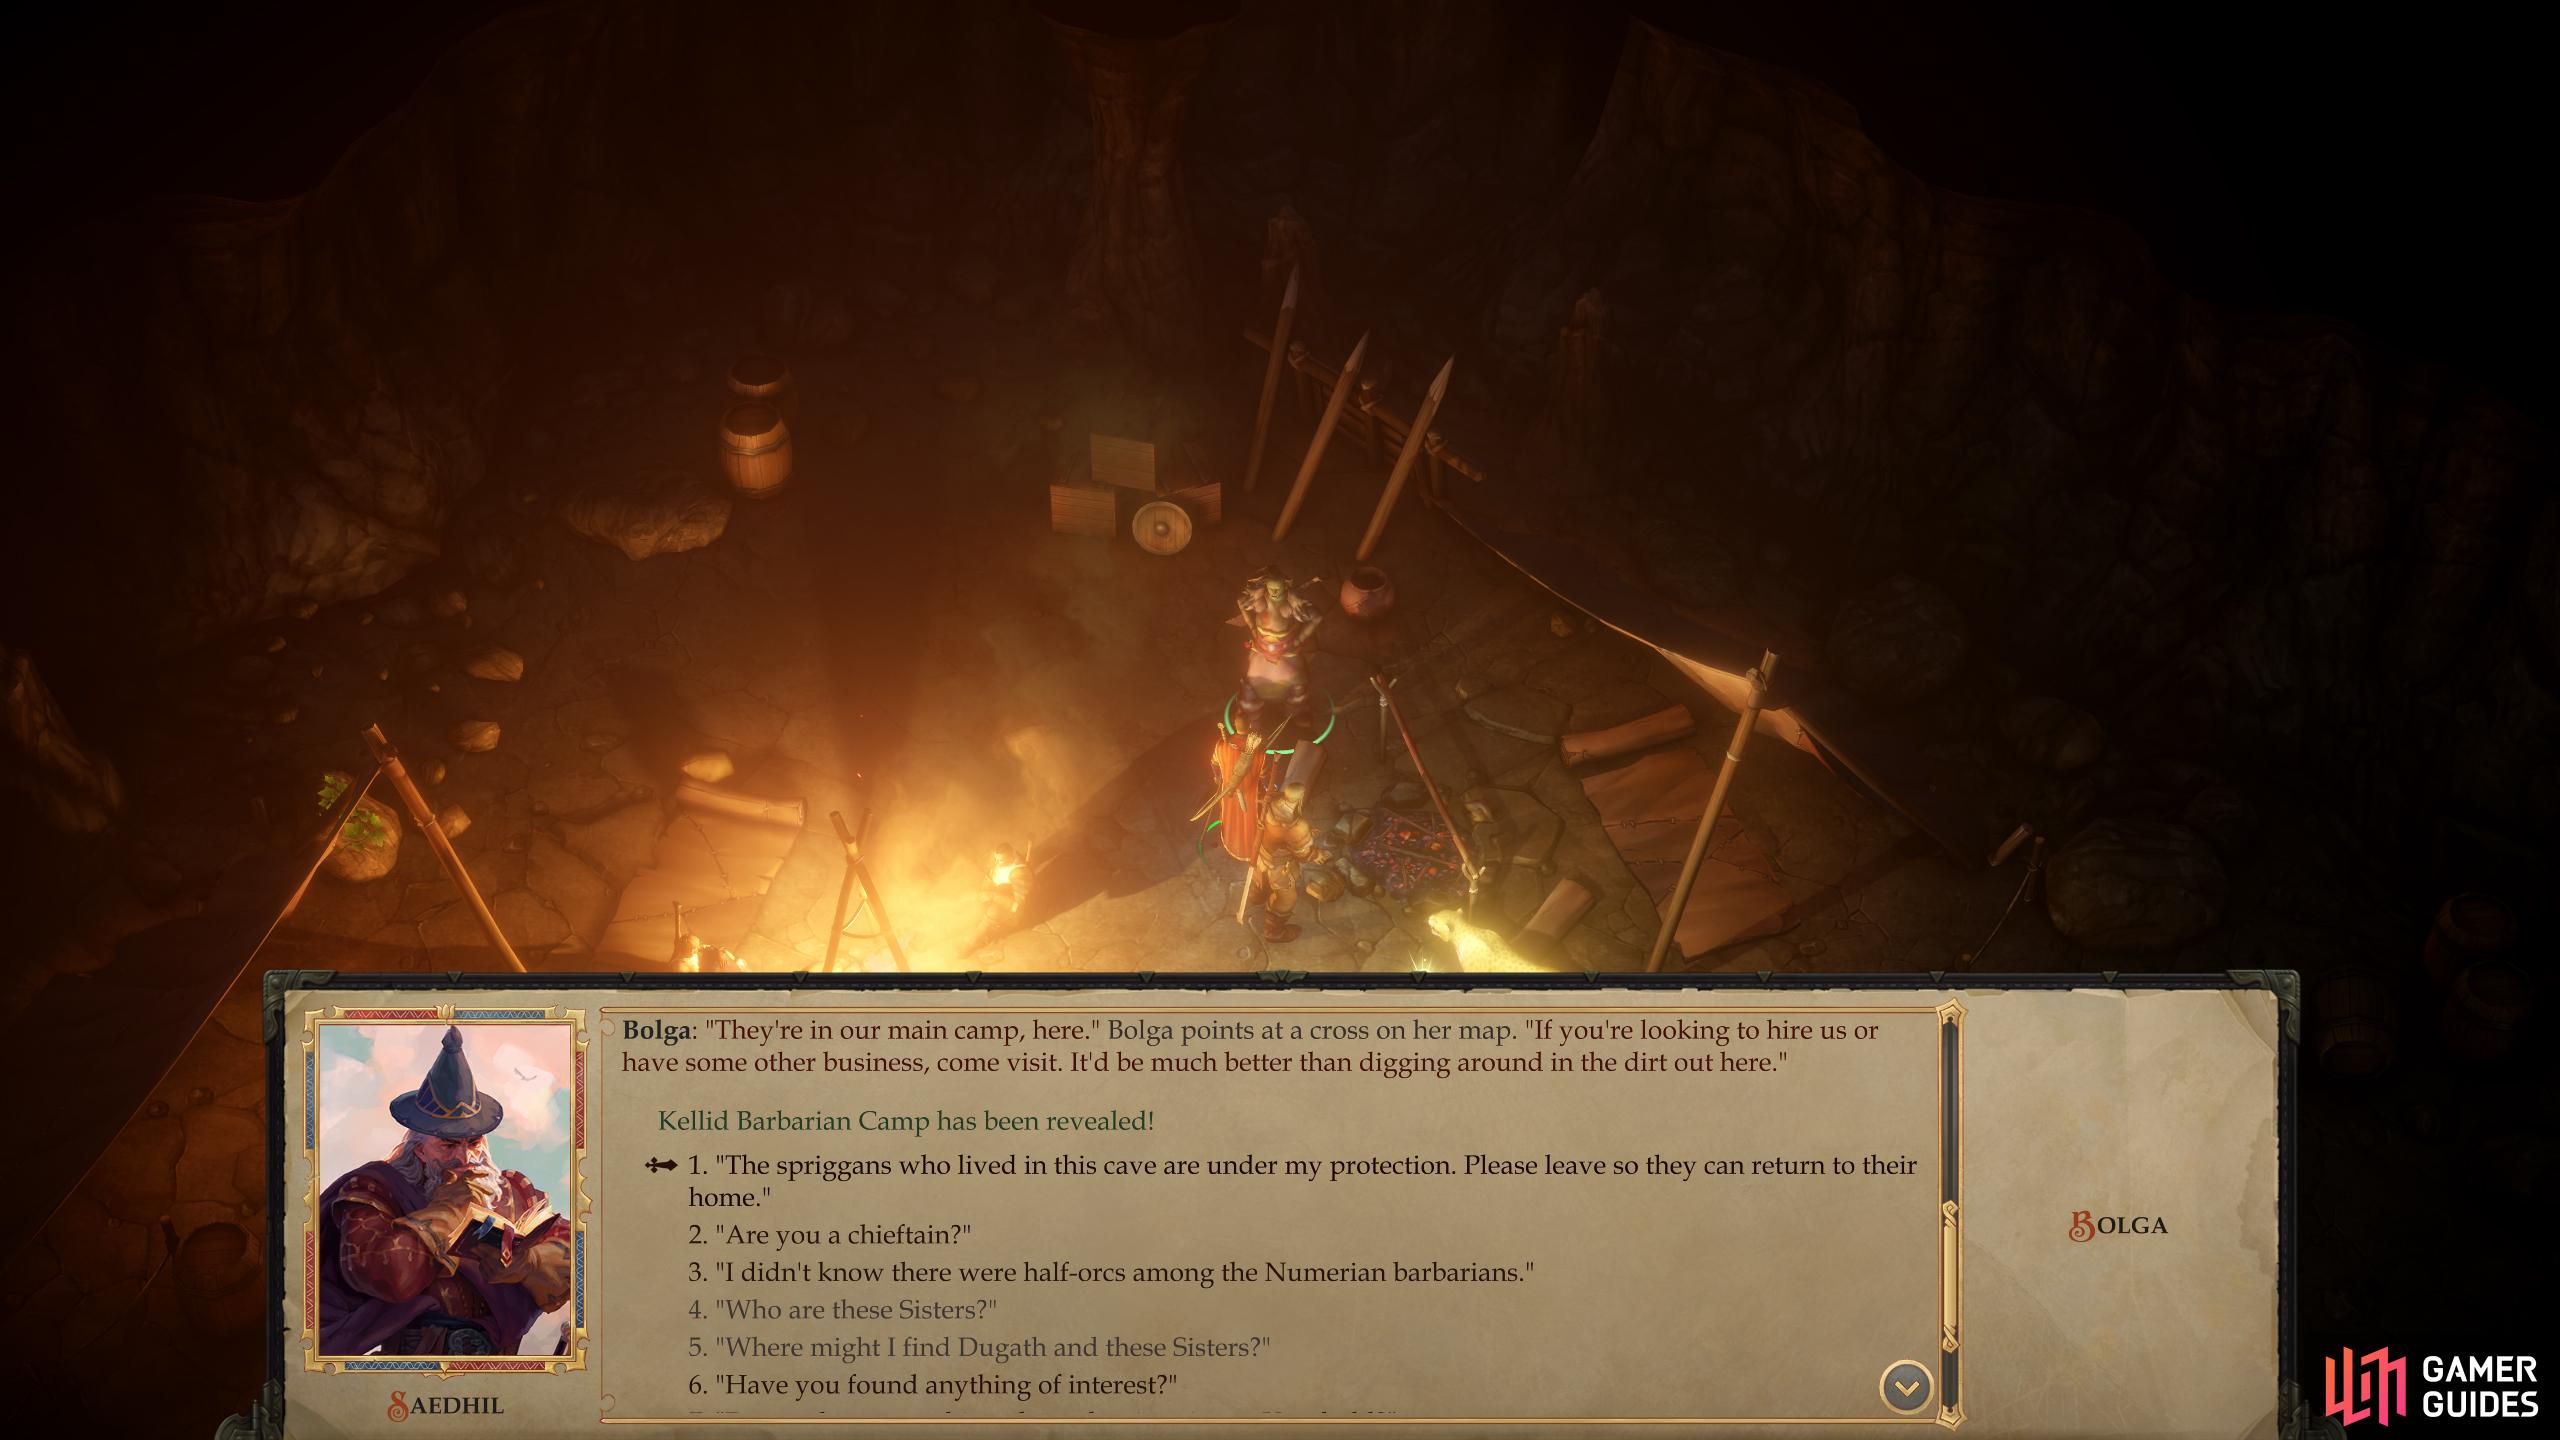 Talk to Bolga to learn the location of the "Kellid Barbarian Camp",